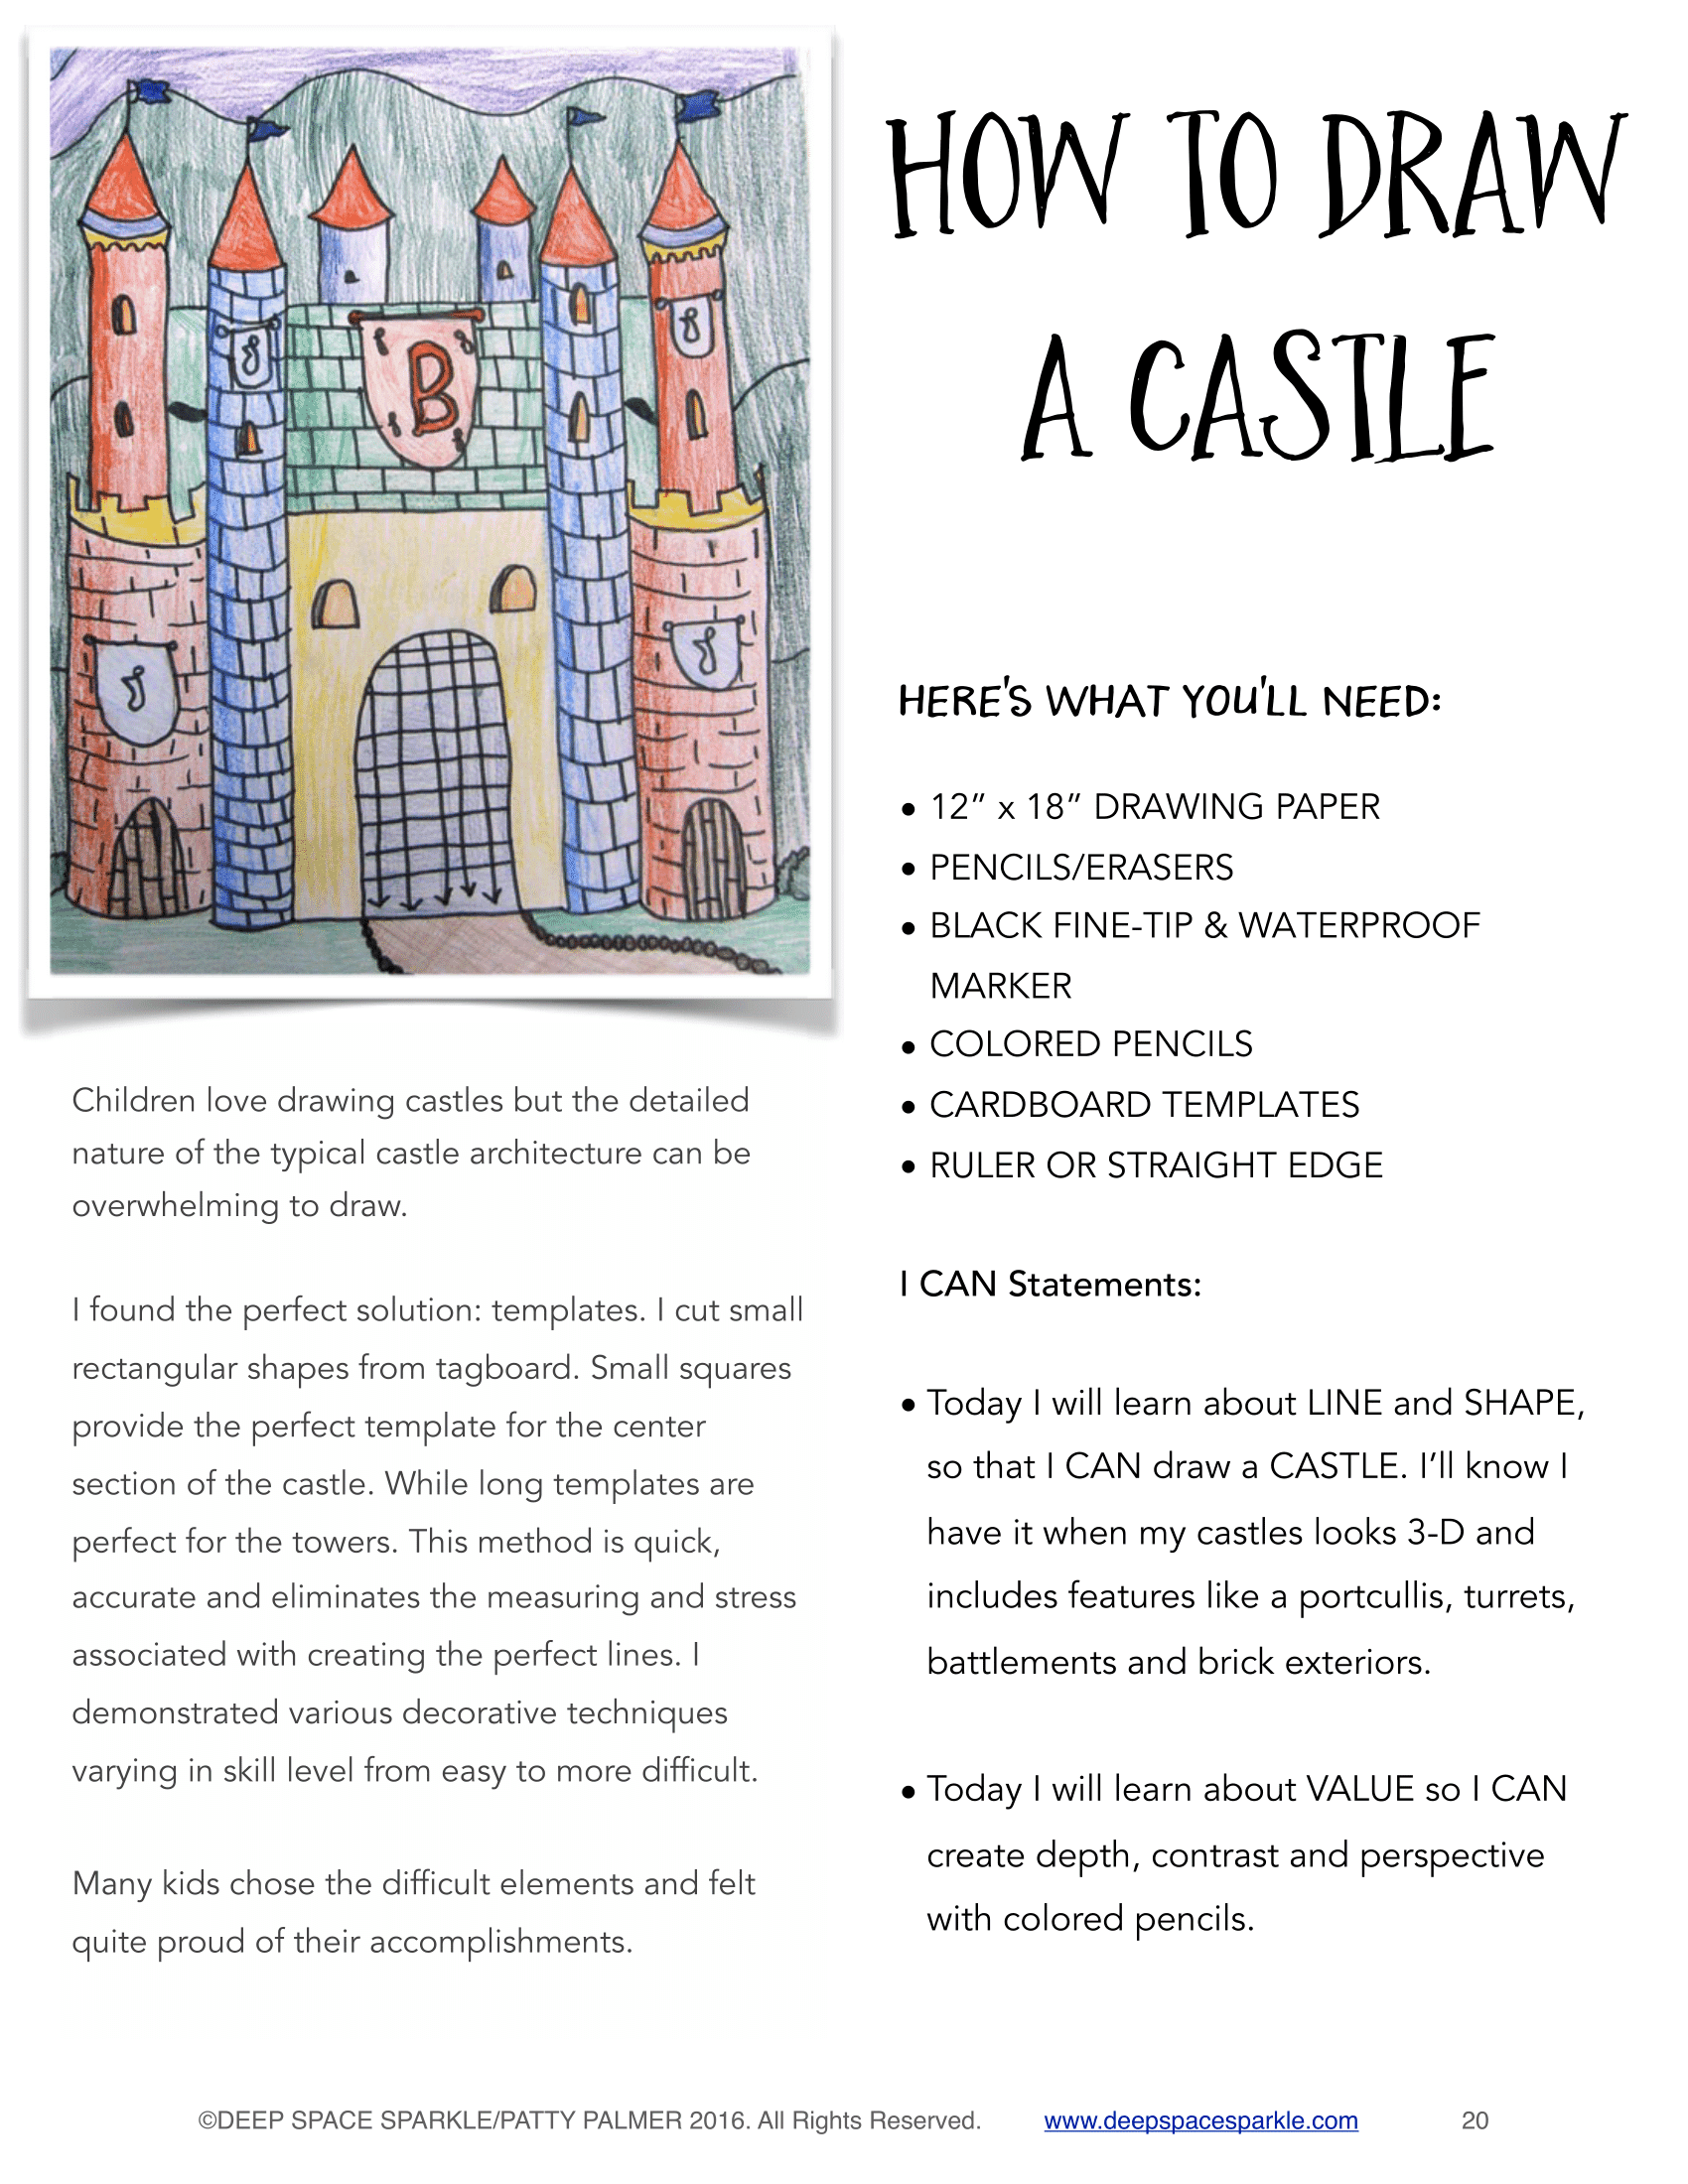 Castle Coloring Page Vector Images (over 780)